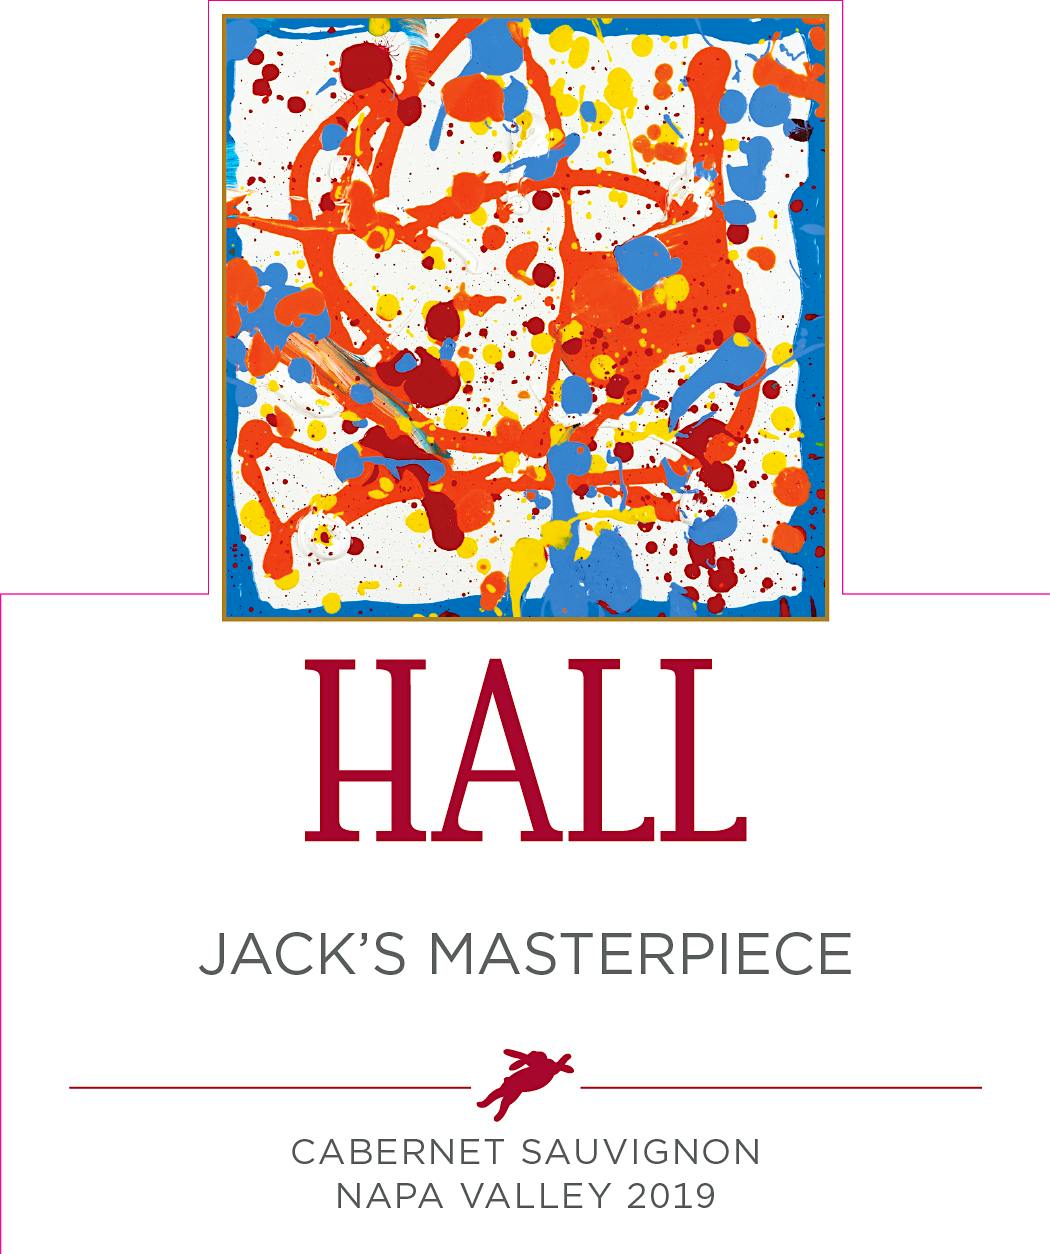 Label for Hall